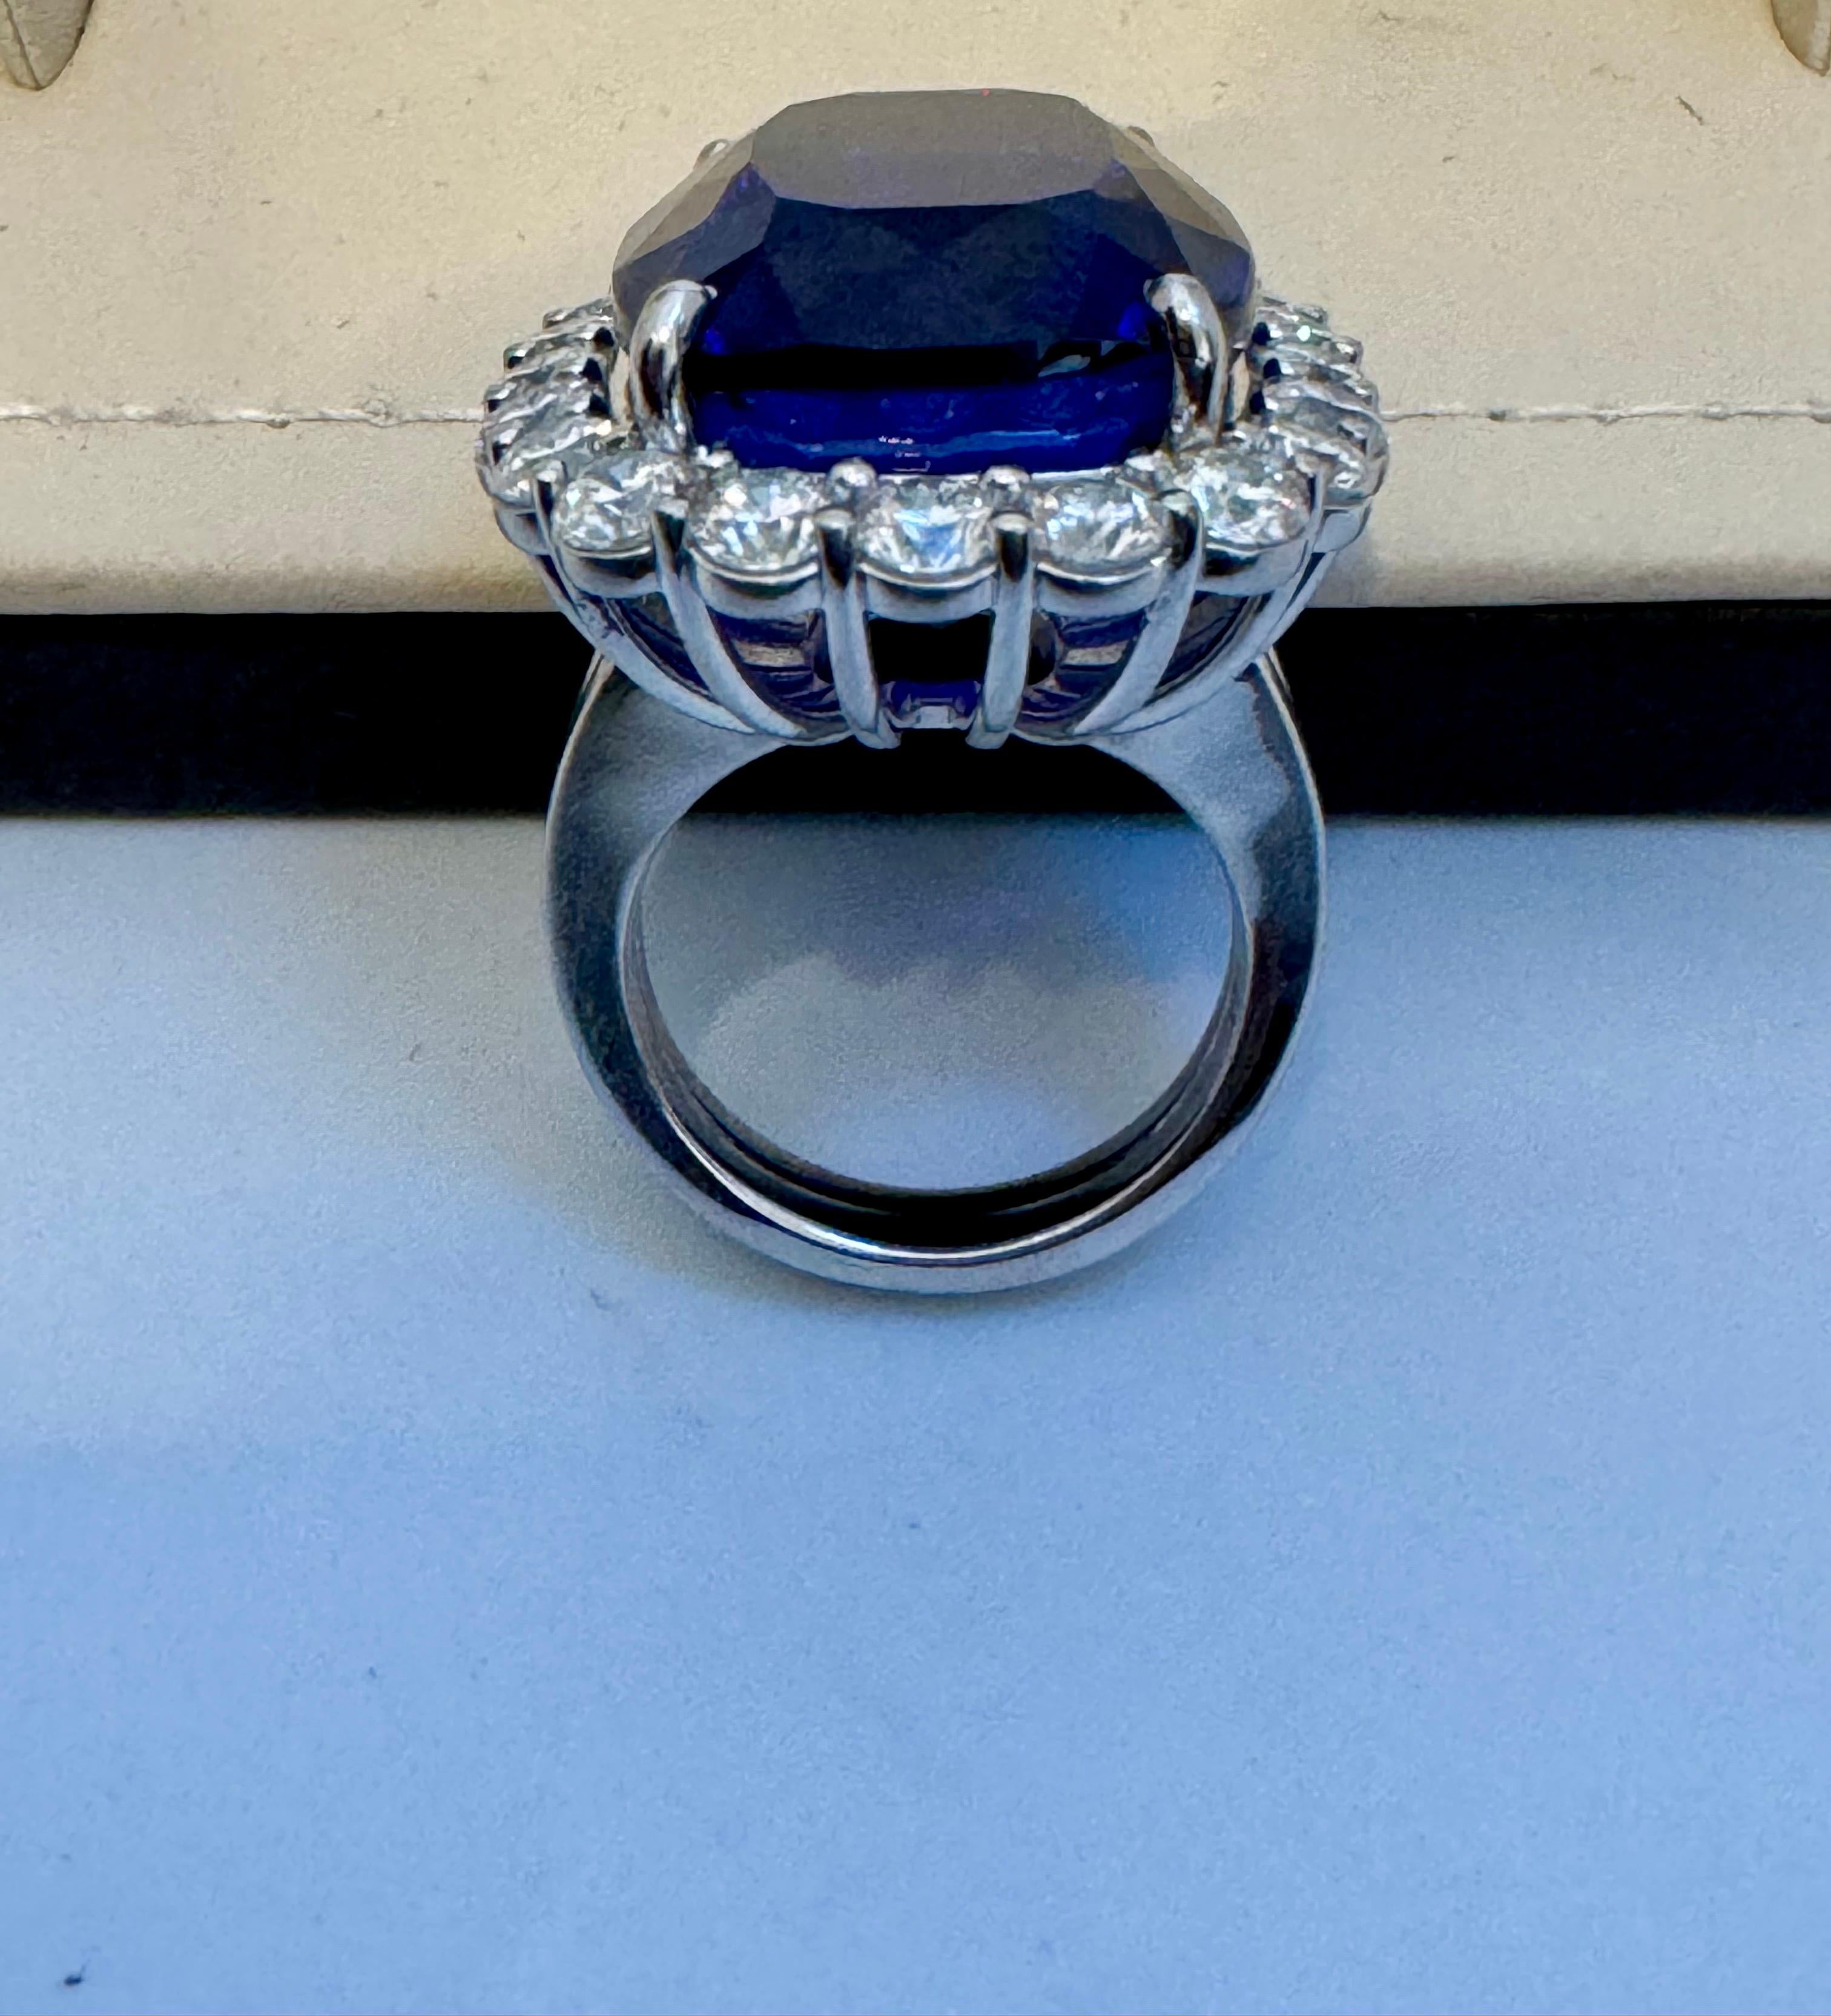 43.74 Ct Cushion-Cut Tanzanite & 4 Ct  Diamond Ring in 14K White Gold Size 6.5 For Sale 1